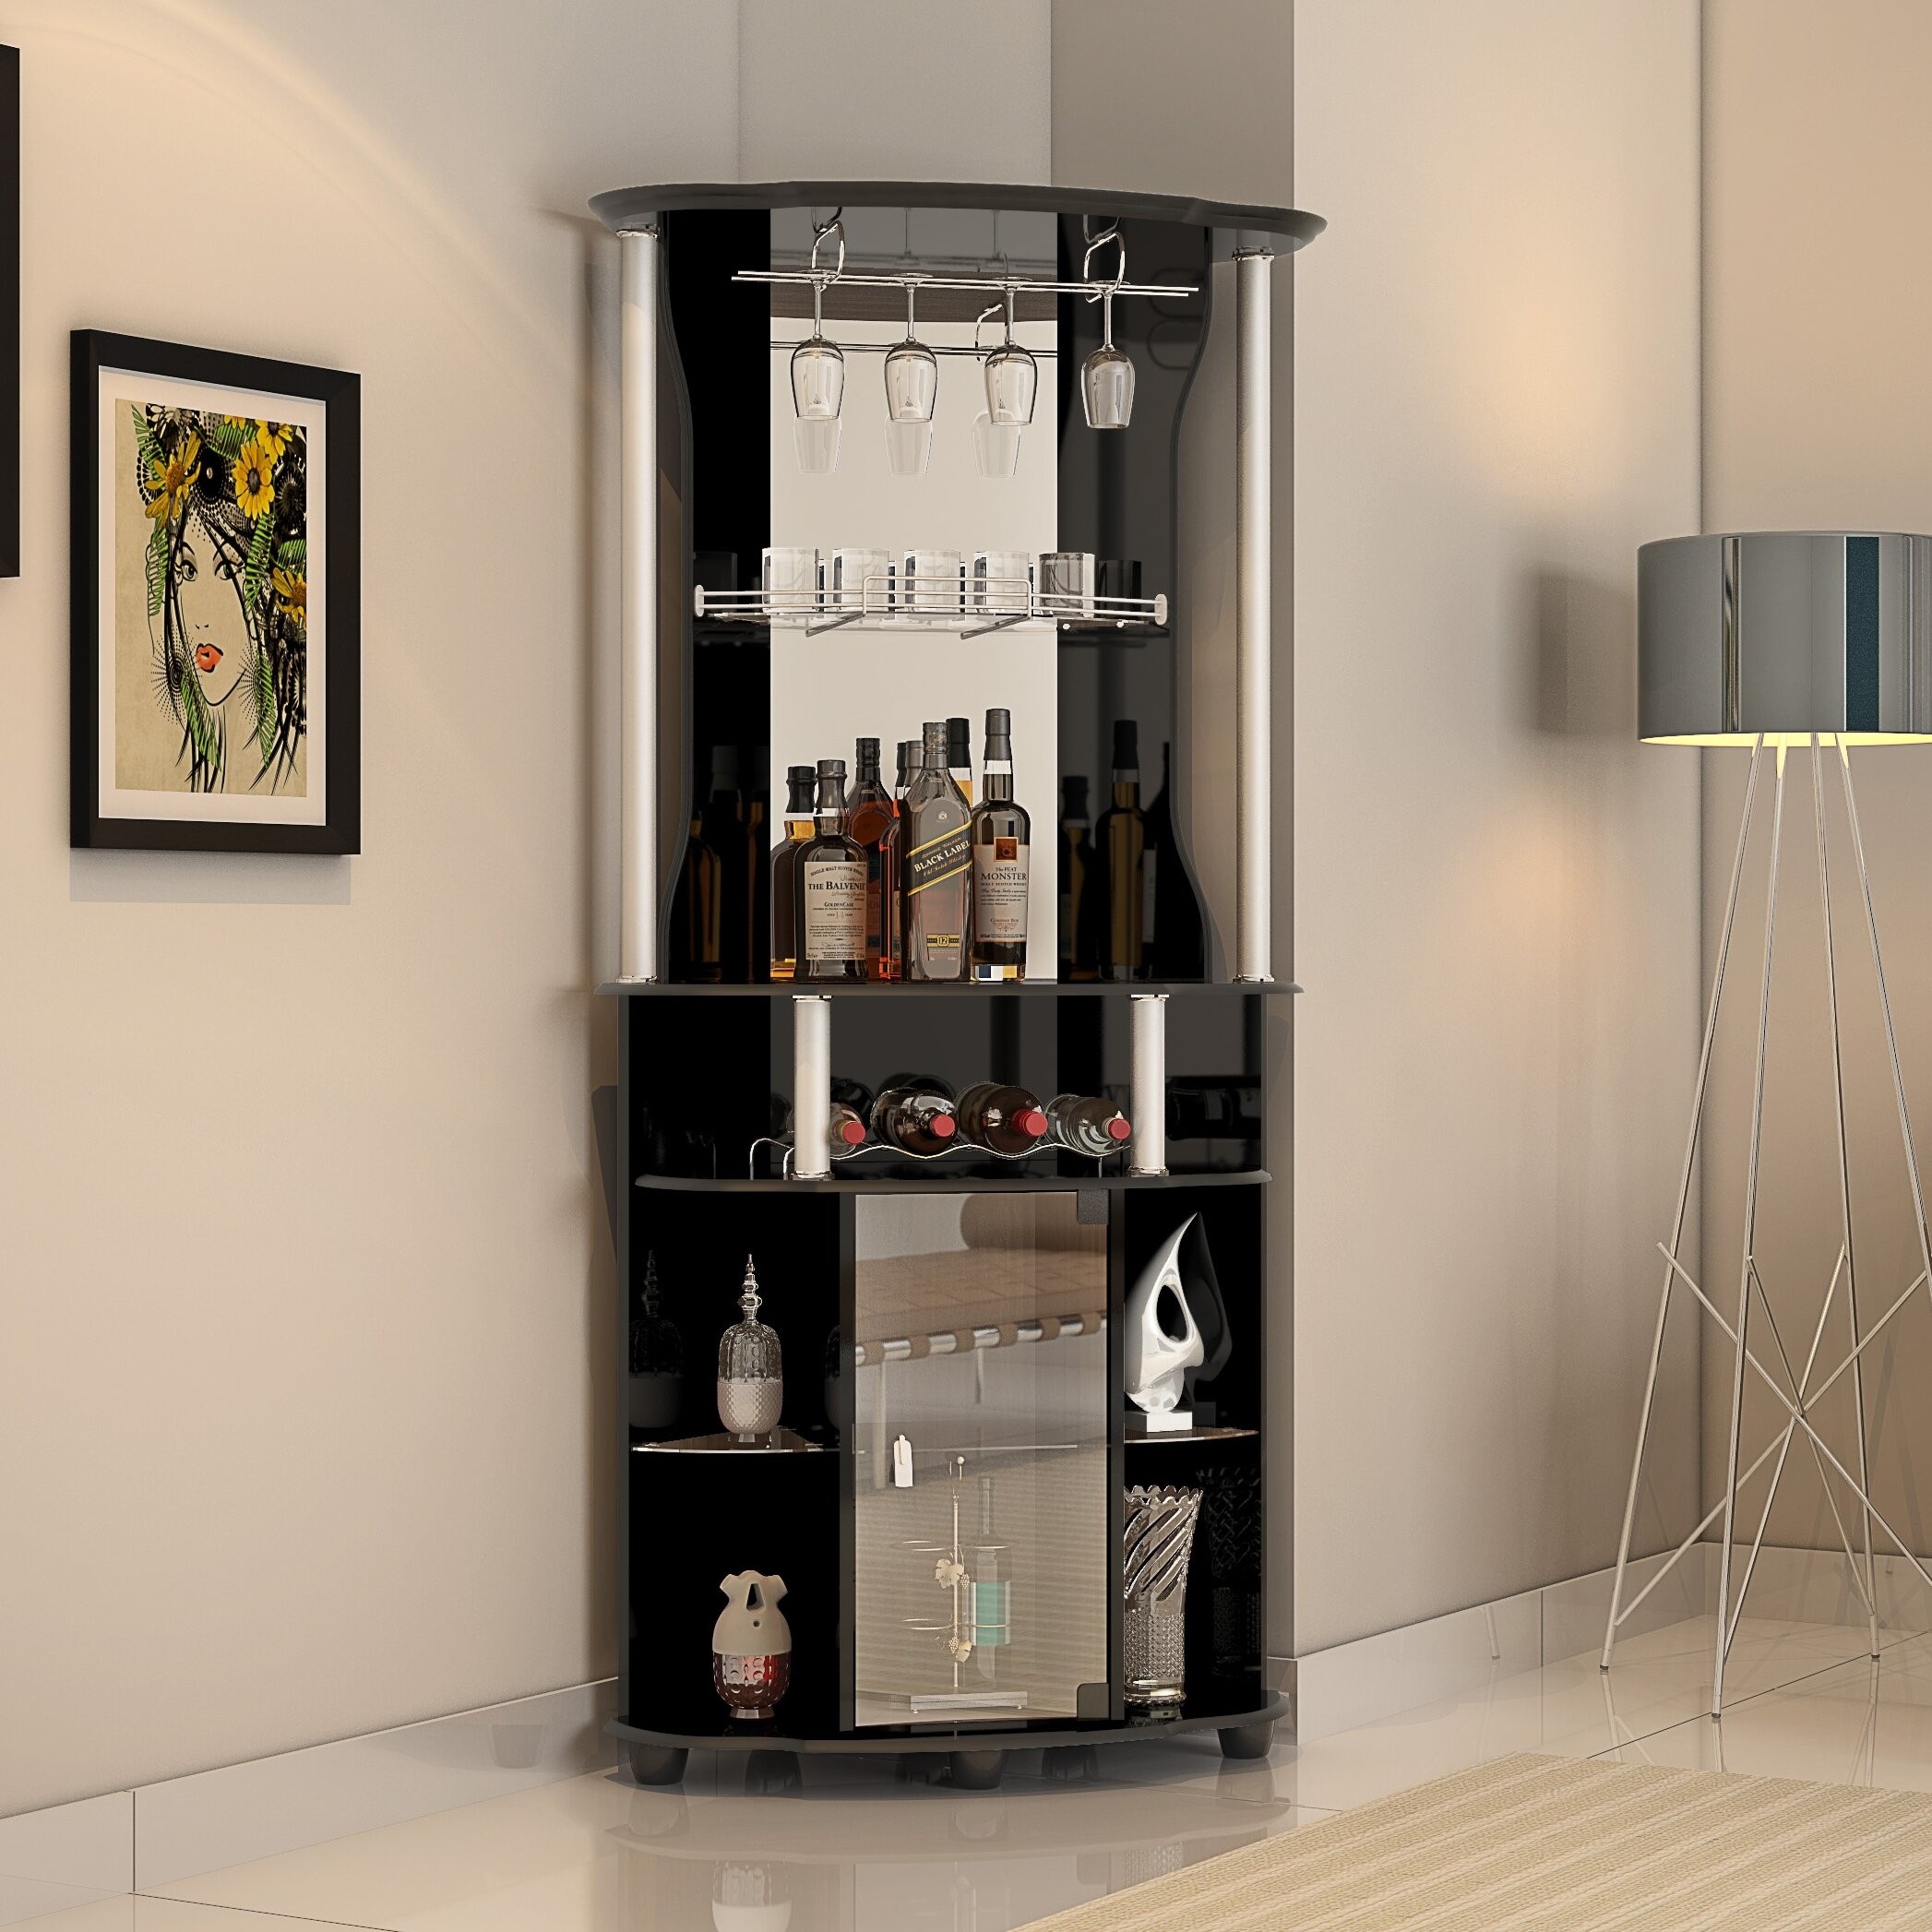 Give your style to the mini bar